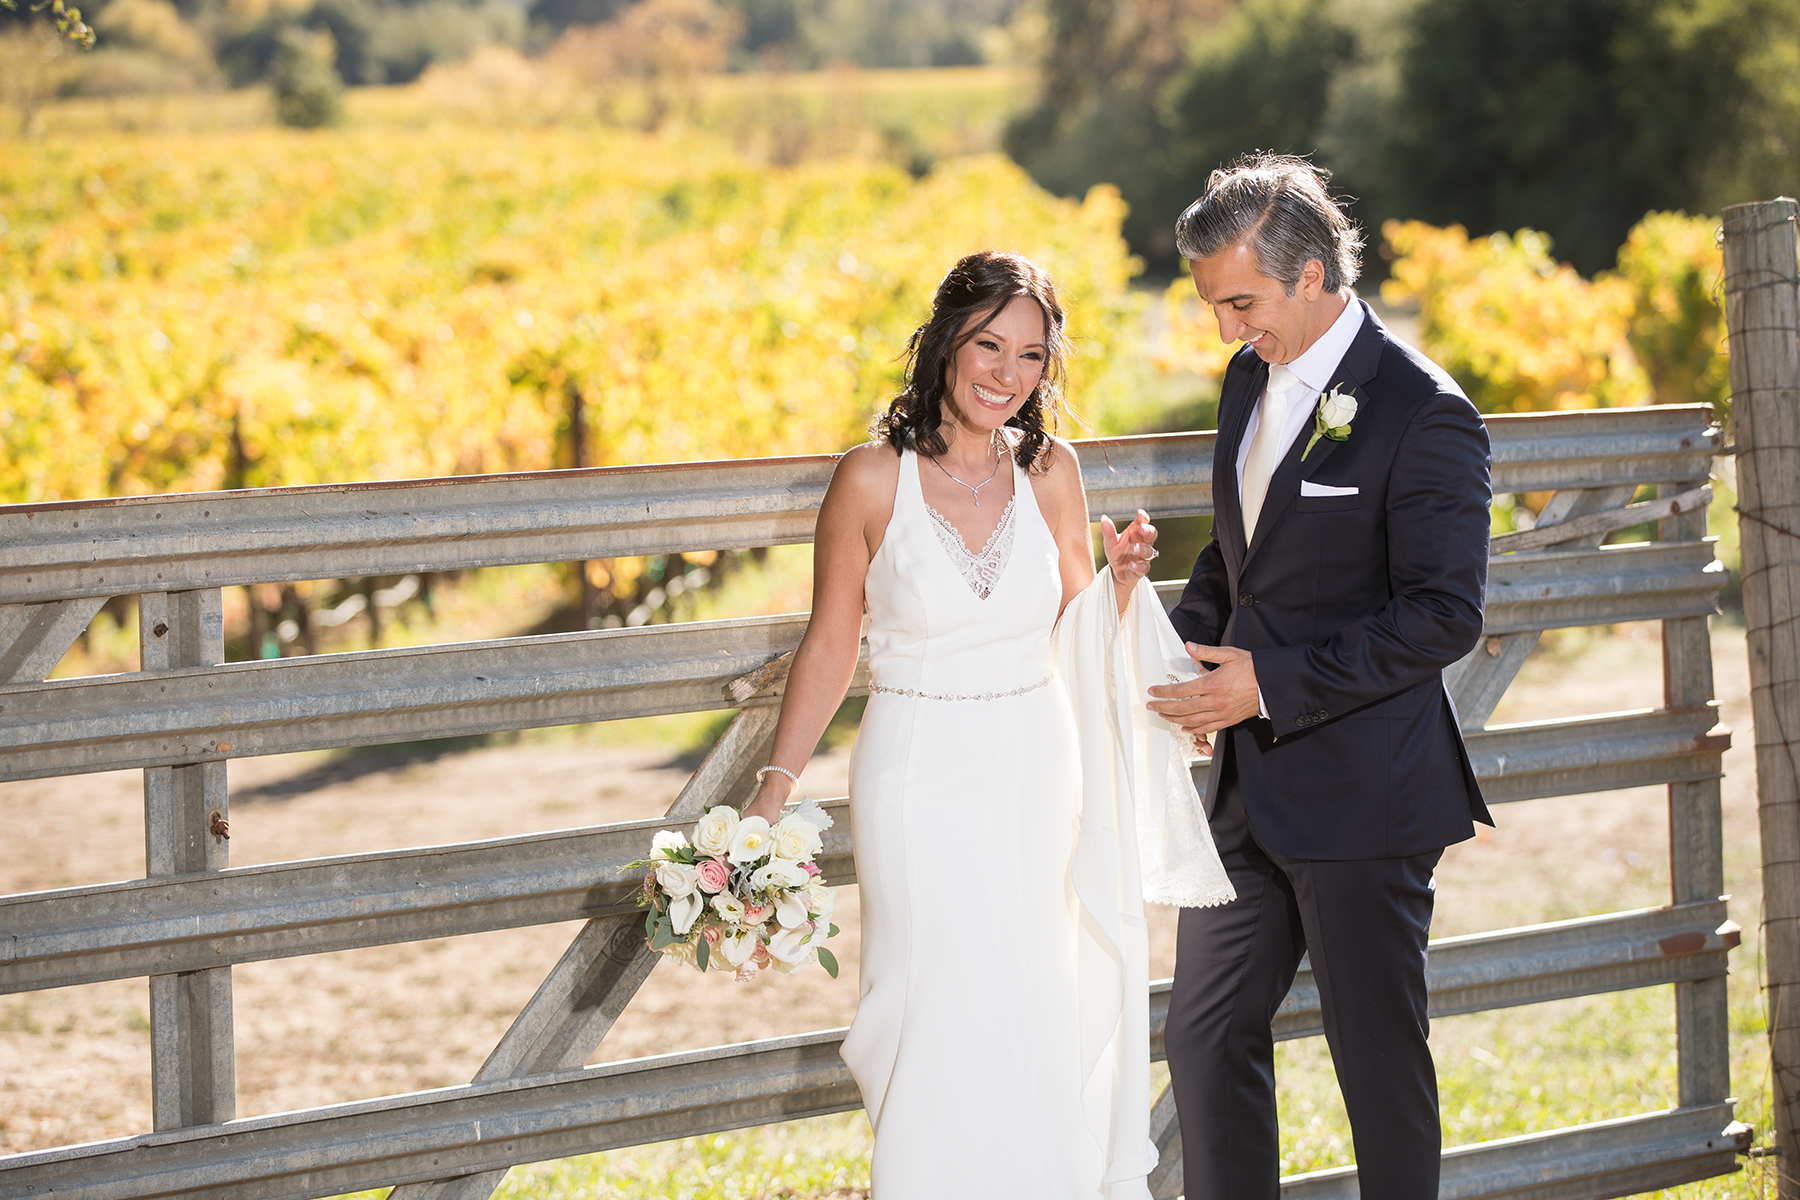 In the midst of the picturesque vineyards at Meritage Resort in Napa Valley, the bride and groom come together to share a heartfelt and romantic moment. The couple stands surrounded by thriving grapevines adorned with ripe fruit, representing a sense of abundance and the journey of growth. Against the backdrop of the resort's architectural beauty and the gentle slopes of rolling hills, this image perfectly encapsulates the beauty of their union set against the renowned wine country scenery of Napa